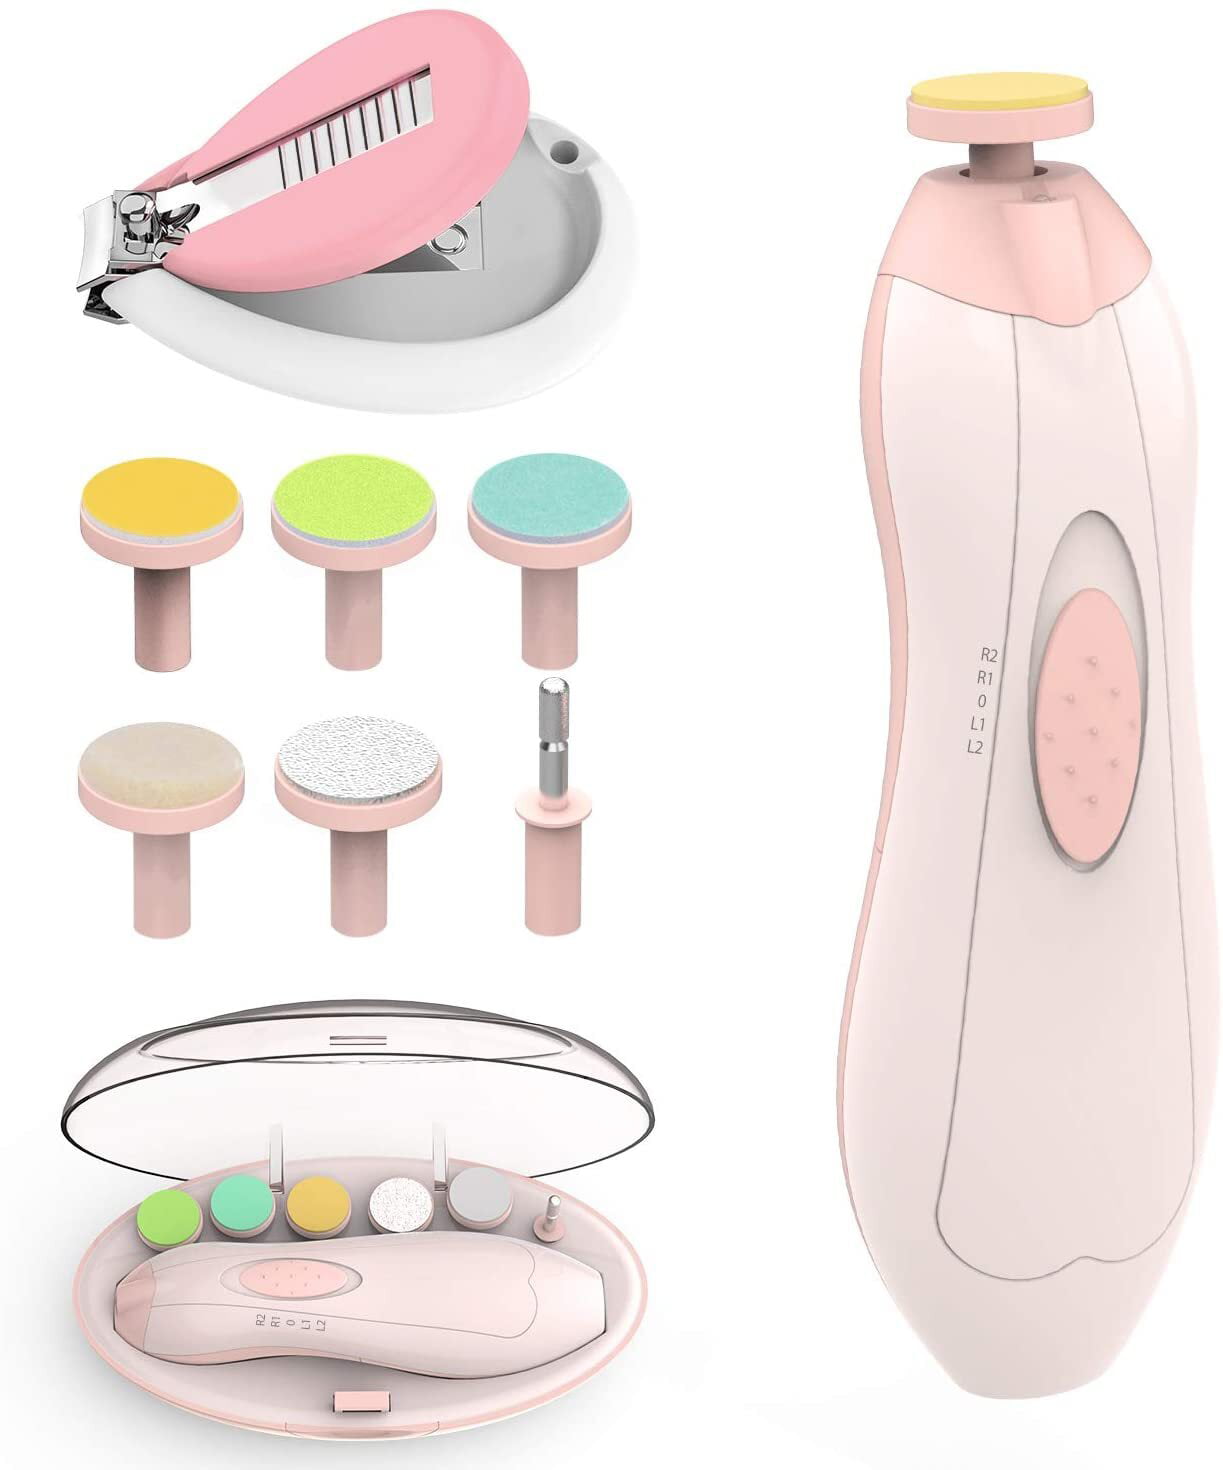 Polish Kids Baby Manicure Electric Nail Trimmer Toes Device Newborn Nail  Care | eBay